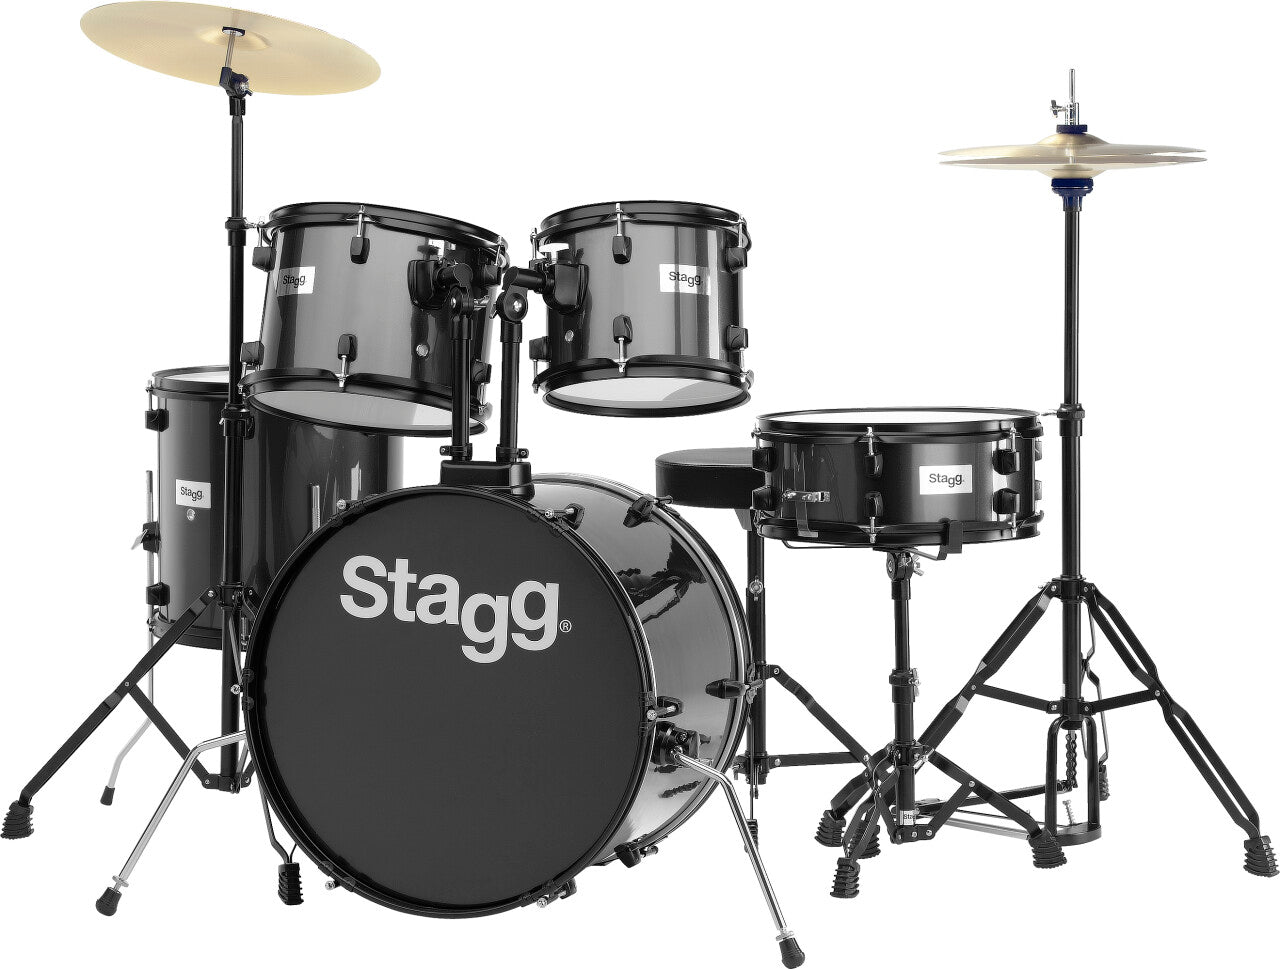 Stagg TIM120B Full Size Adult 5-Piece Acoustic Drum Set with Hardware and Cymbals - Black